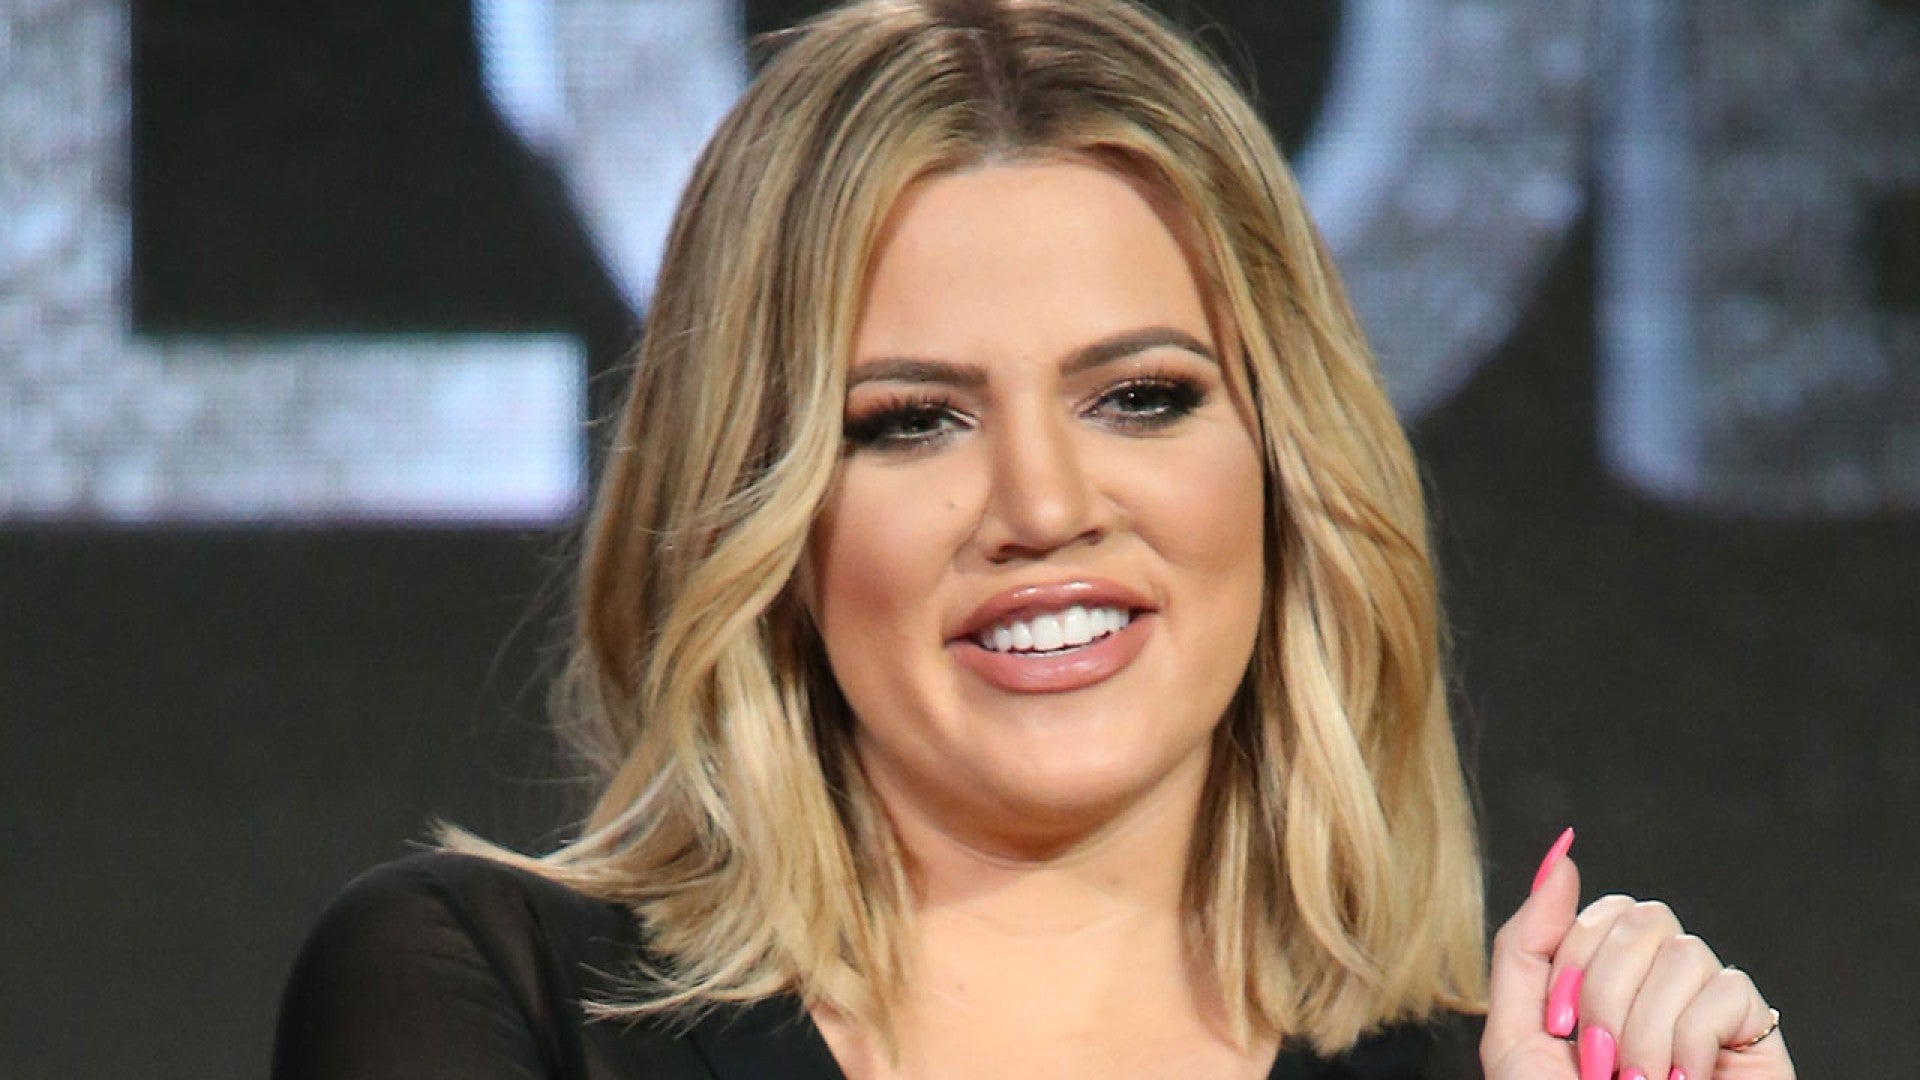 Khloe Kardashian Reveals (And Ranks!) The 3 Craziest Places Shes Had Sex Pic Hd